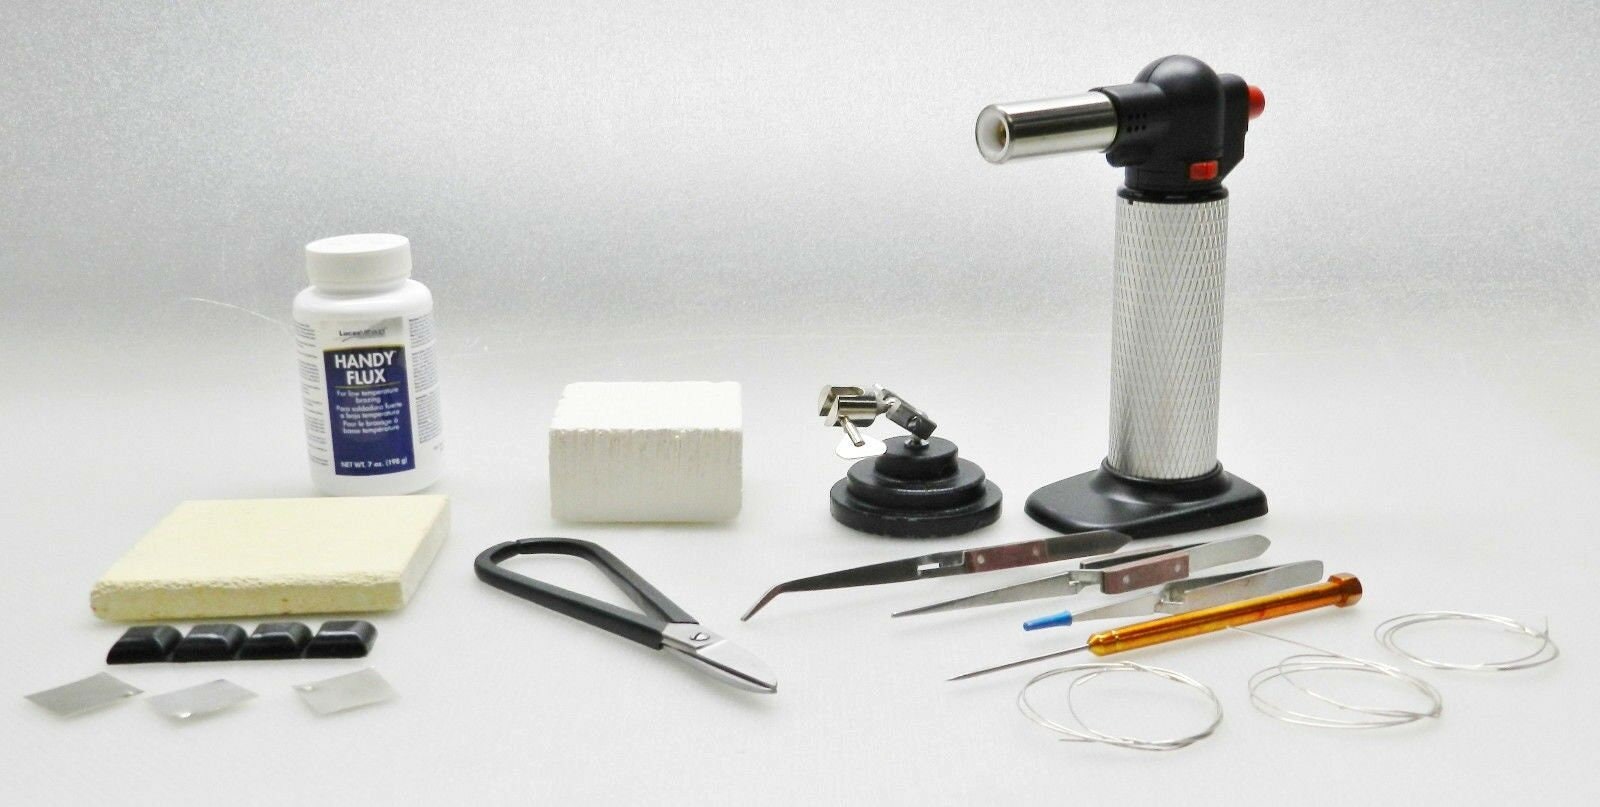 Jewelry Soldering Kit Tools and Supplies to Make  Repair Etsy UK